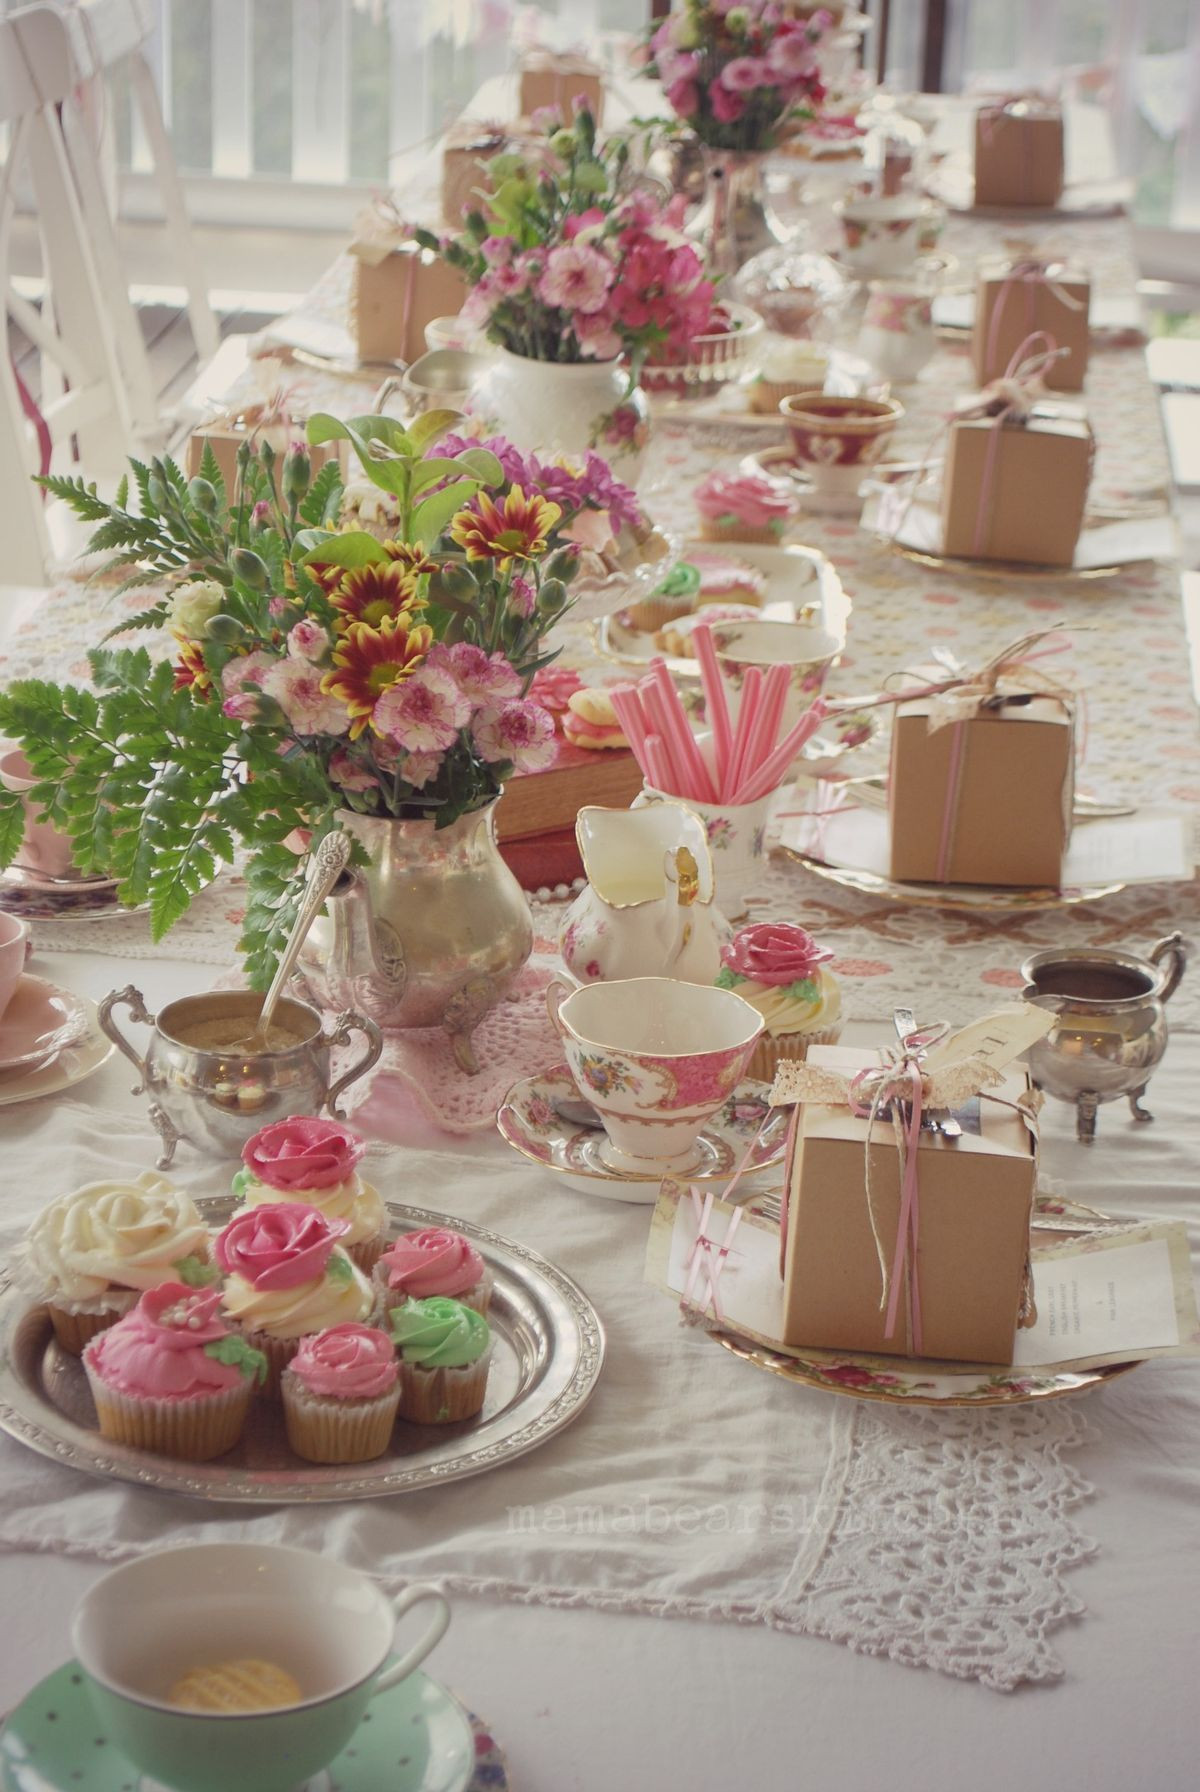 Ideas For A Tea Party
 Pin by Joy Ray on Tablescape in 2019